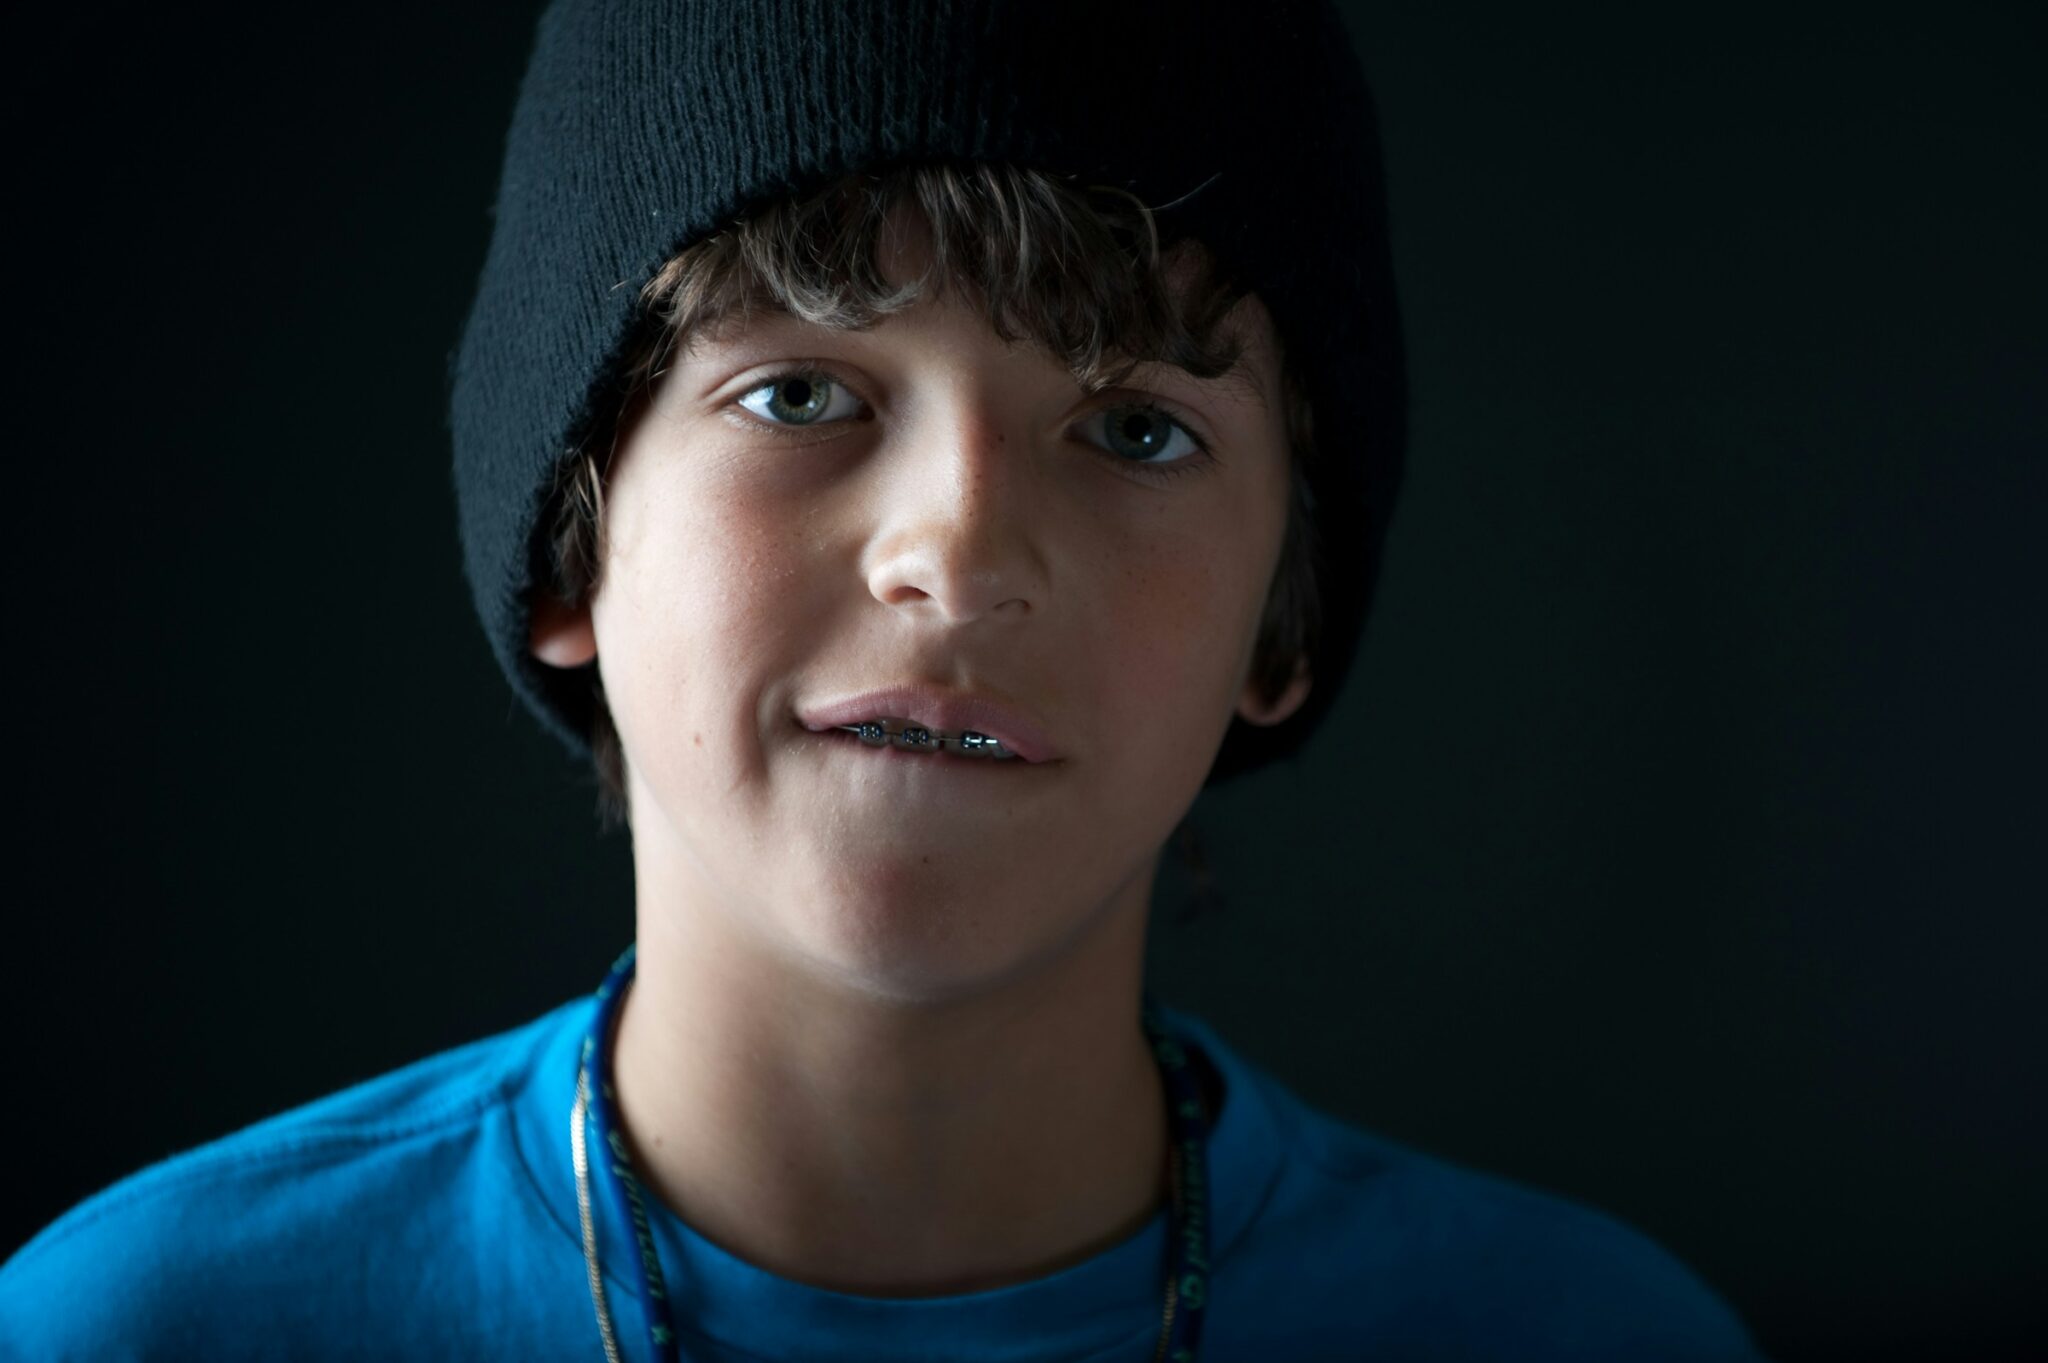 Boy wearing a cap and braces